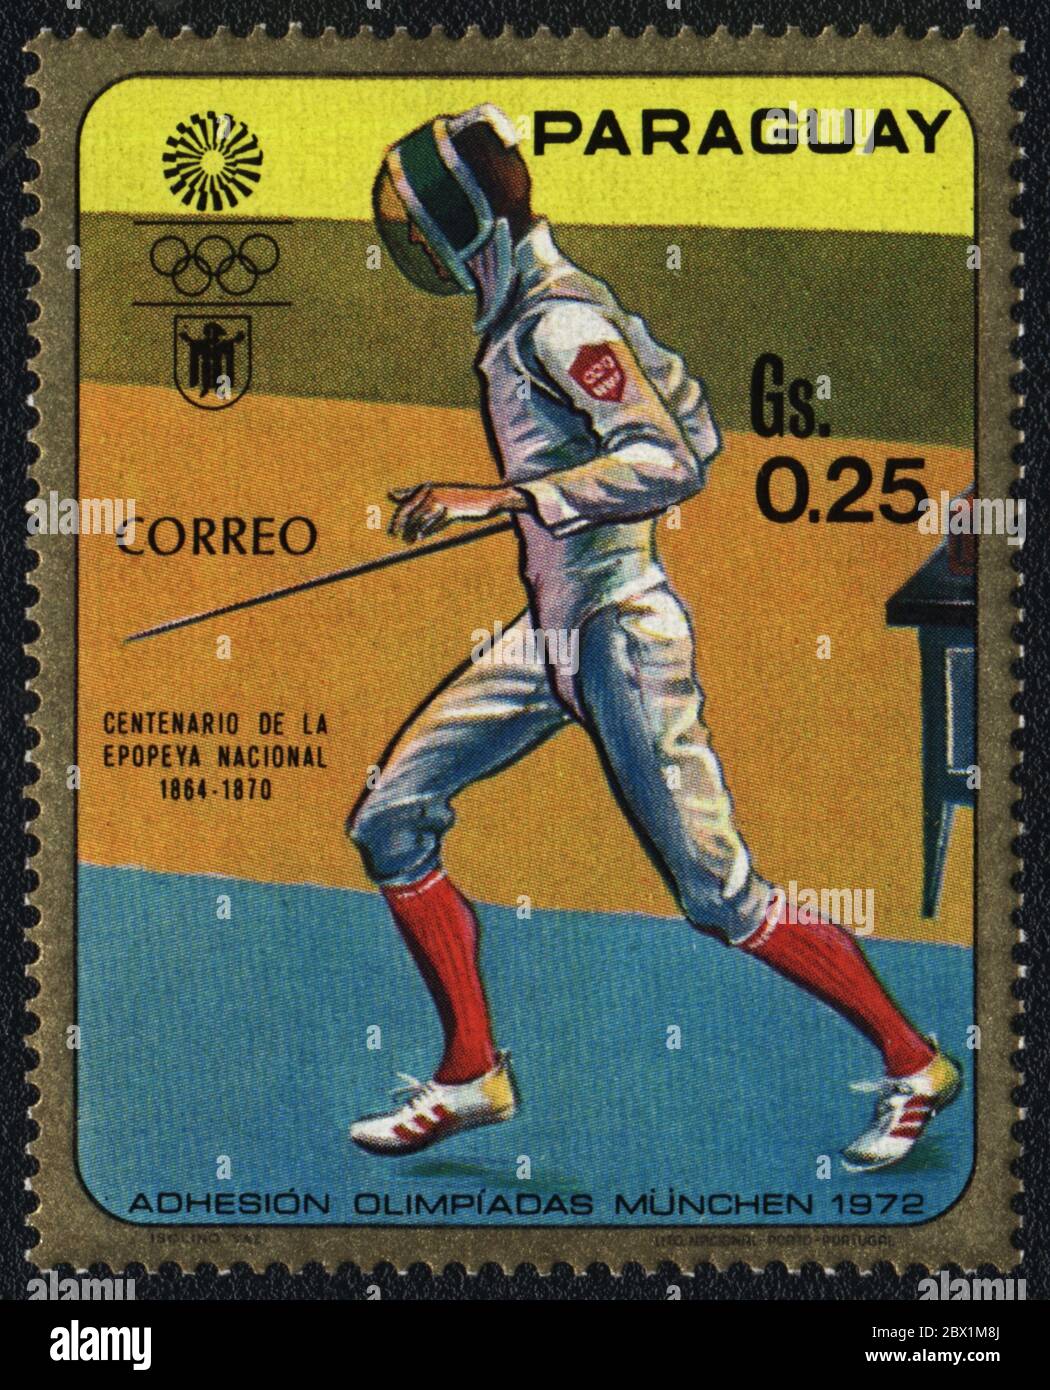 Epee fencer.Summer Olympics Games in Munich 1972. Series: Centenary of the National Epic 1864 - 1870. Postal stamp:  Paraguay, 1972 Stock Photo